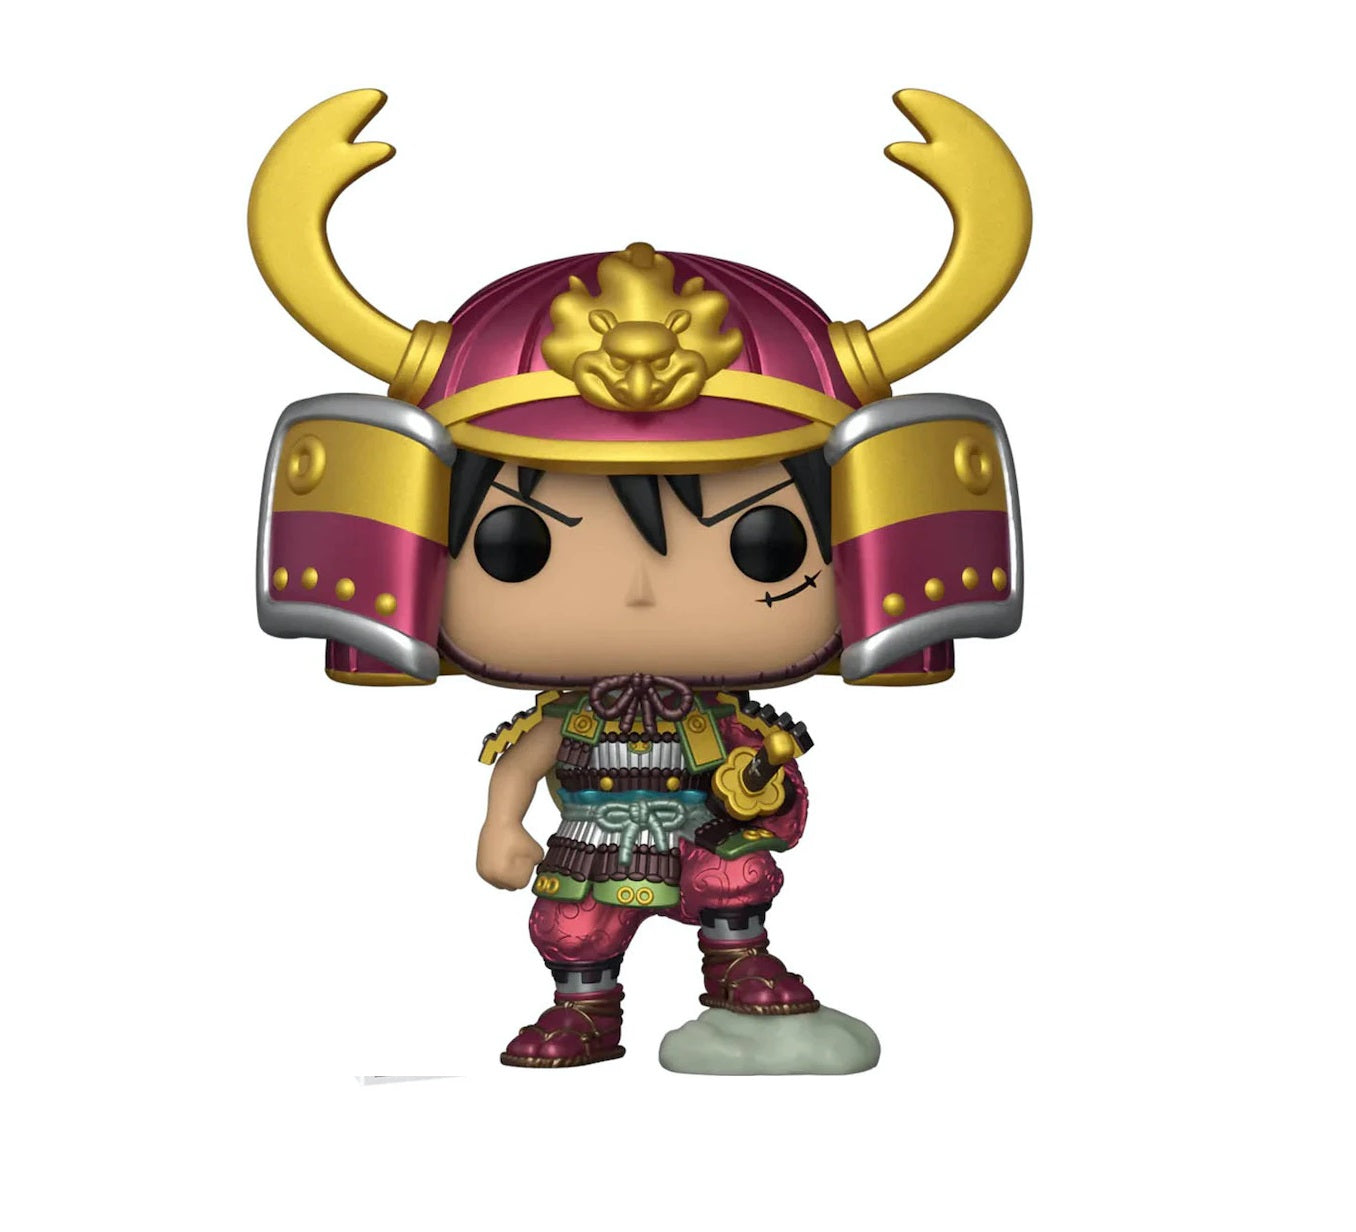 FUNKO POP ONE PIECE ARMORED LUFFY CHASE FUNKOSHOP EXCLUSIVE #1262